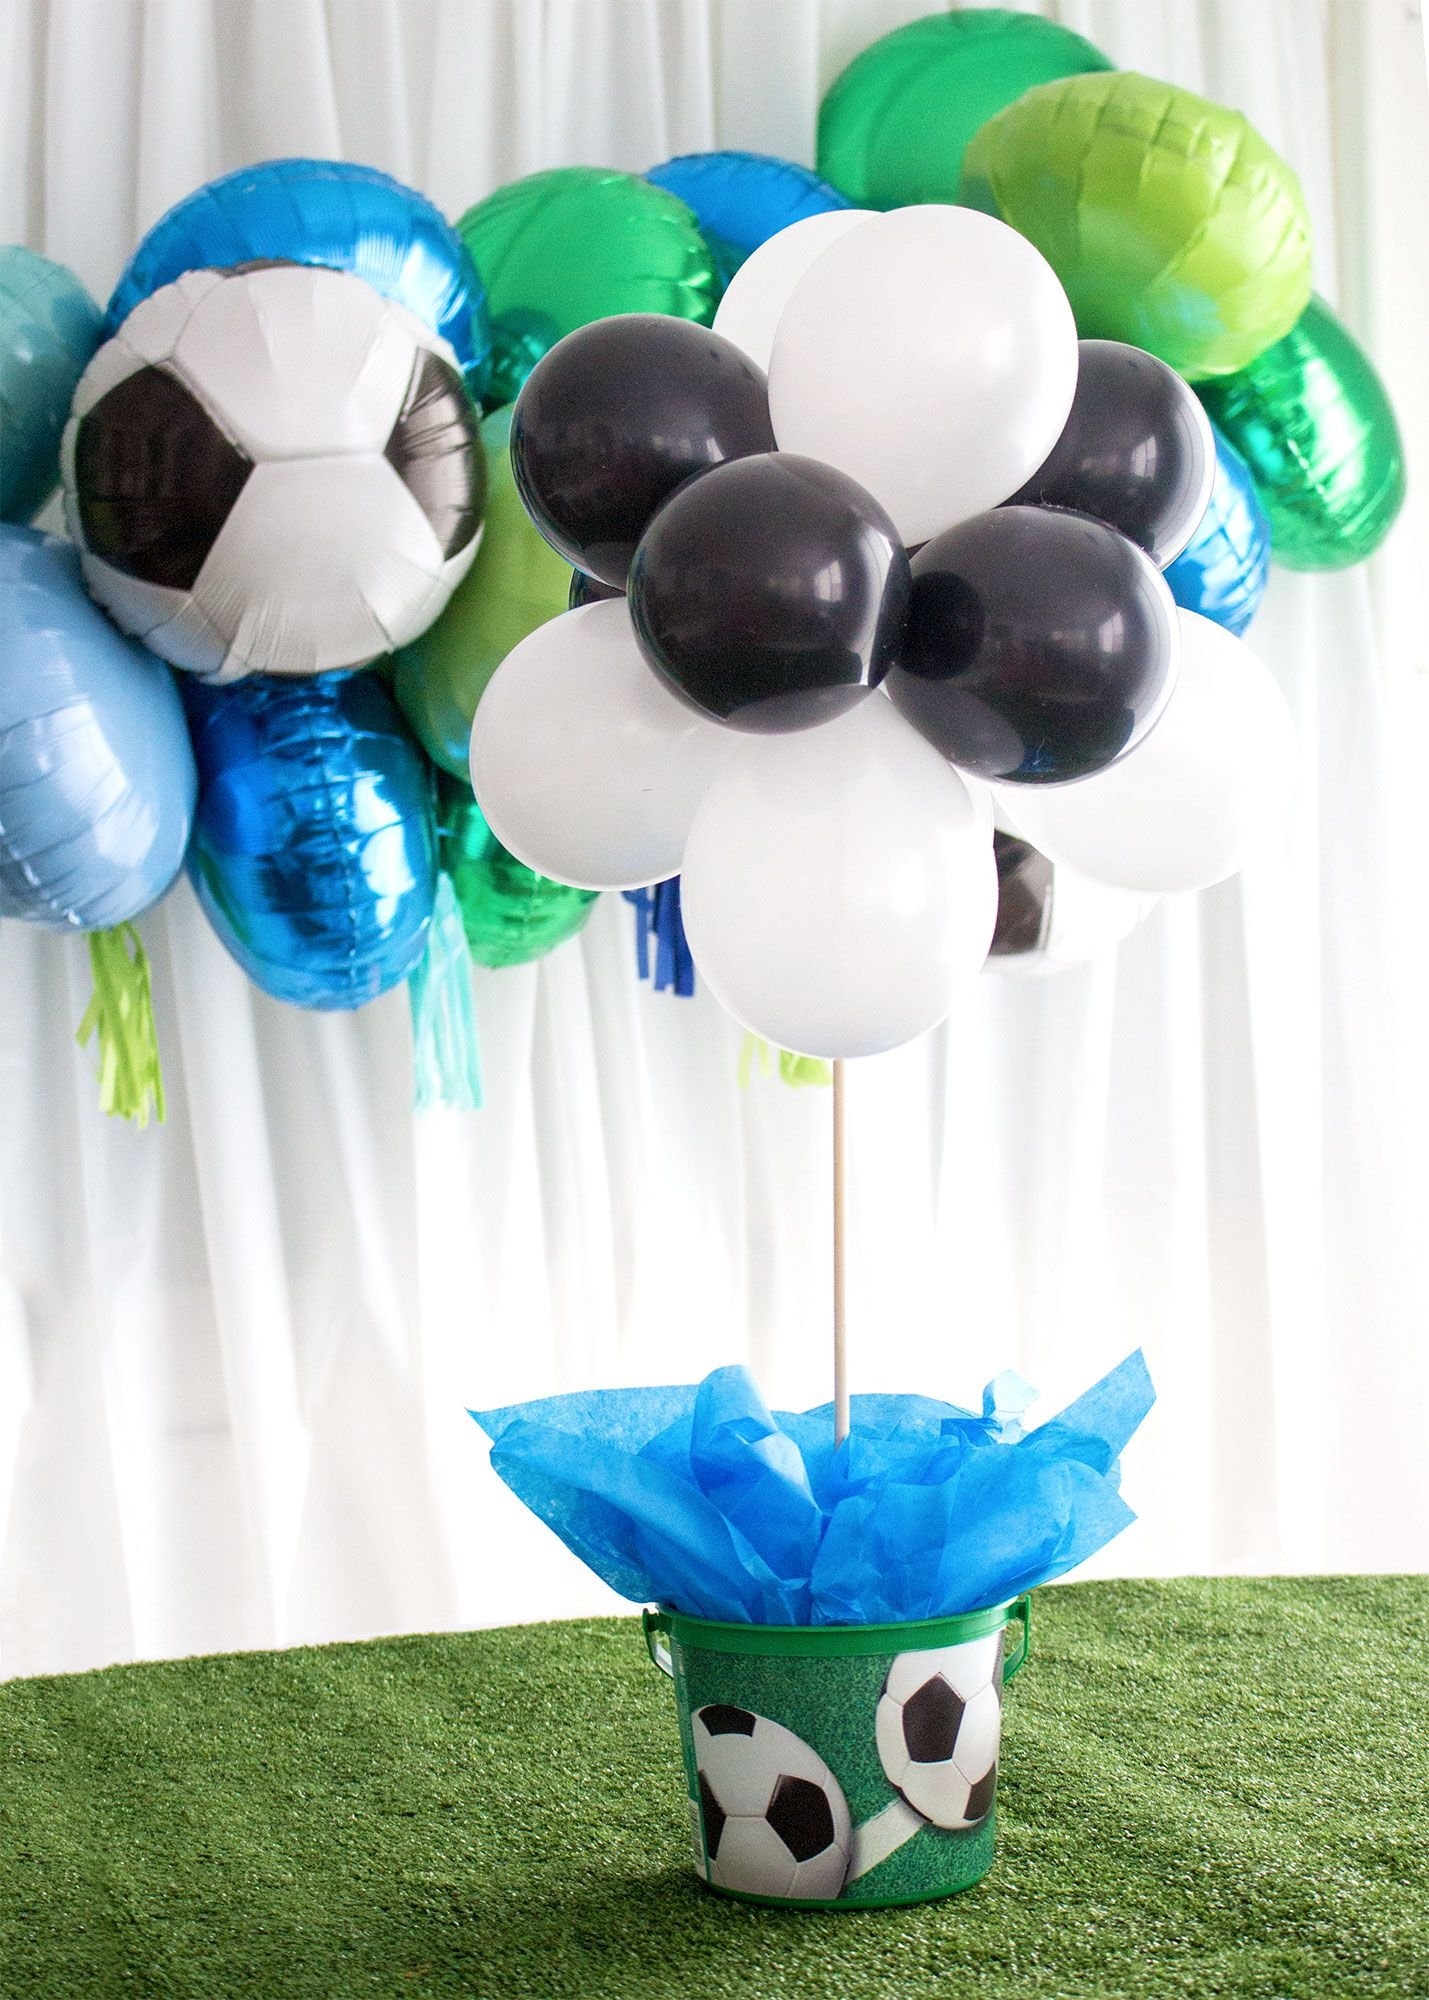 Soccer Balloon Centerpiece with Soccer -Themed Container